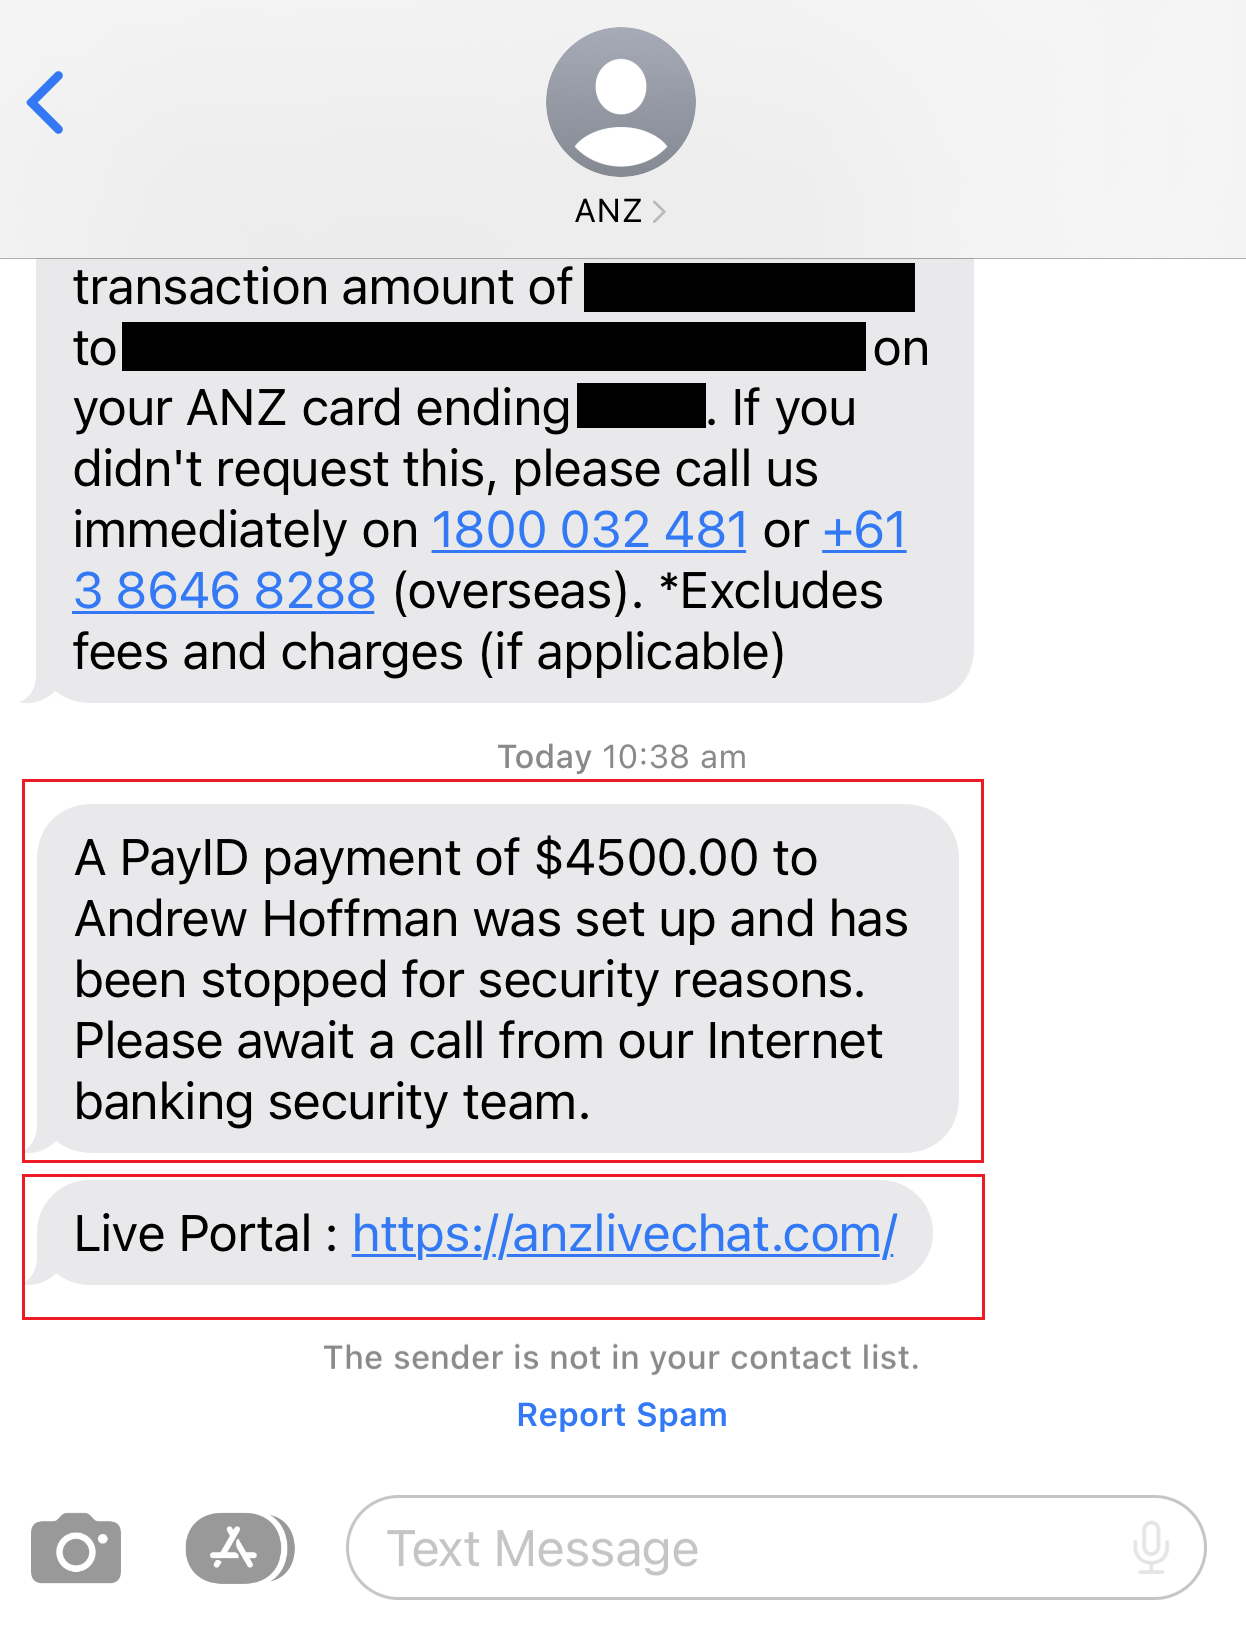 Bank impersonation scam SMS example